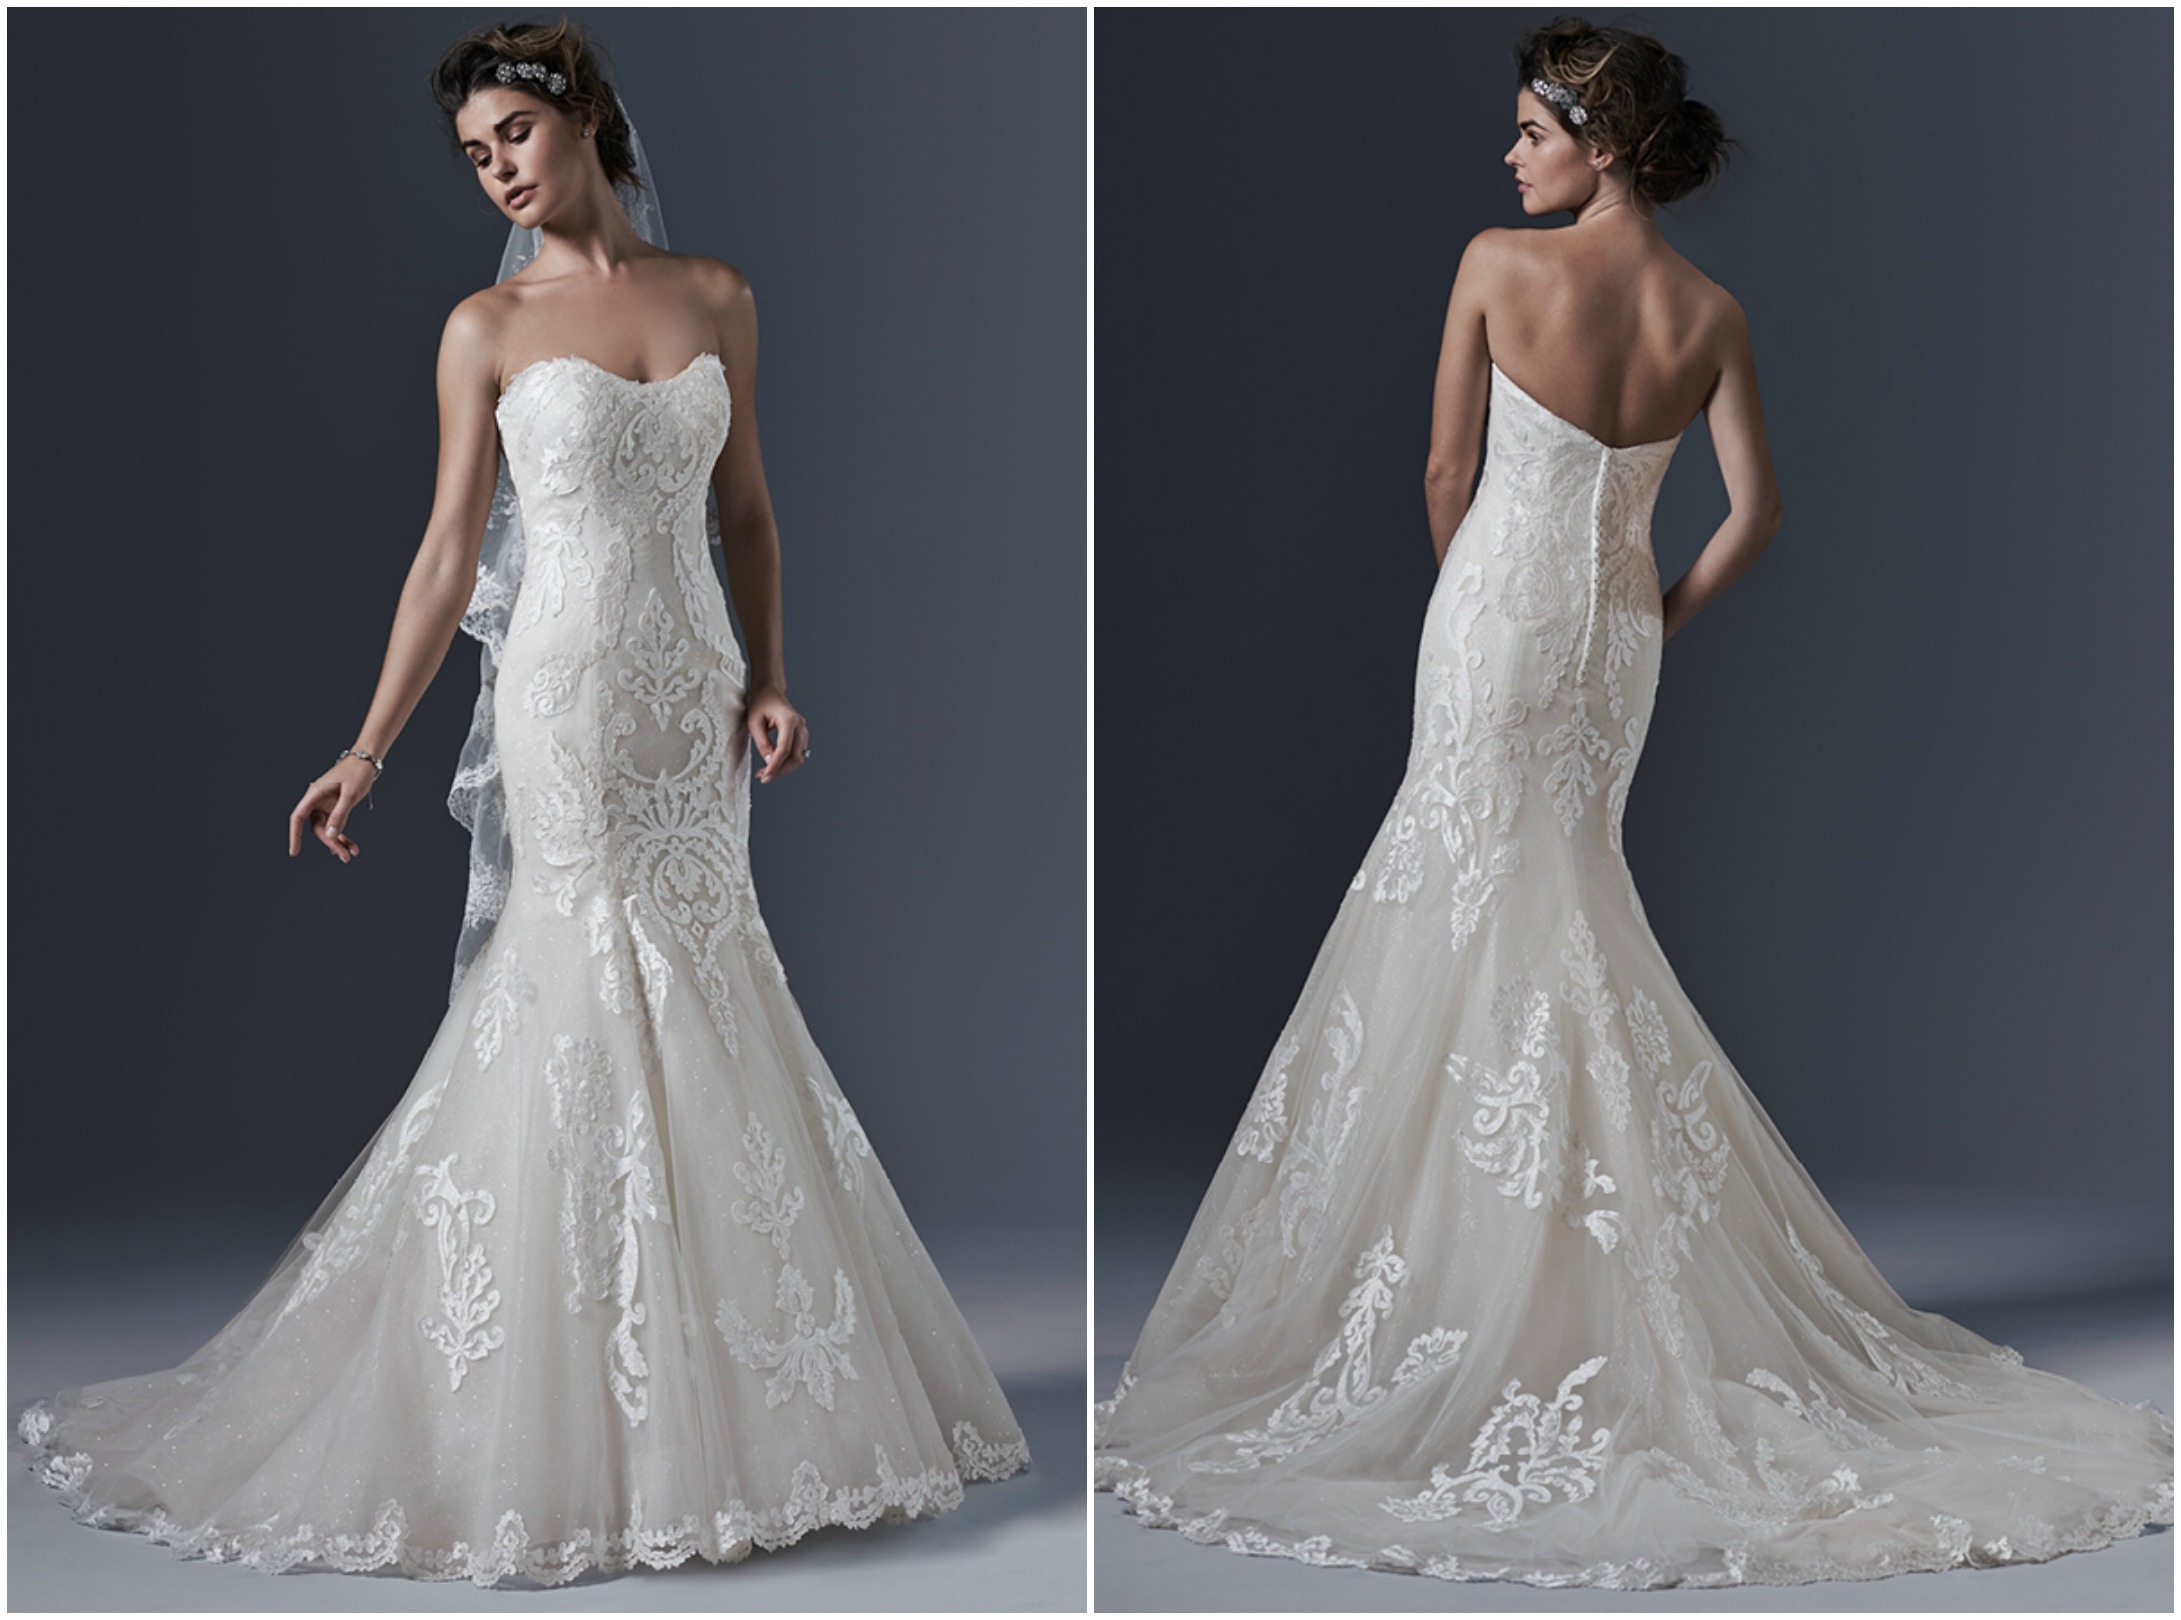 <a href="http://www.sotteroandmidgley.com/dress.aspx?style=5SS618&amp;page=0&amp;pageSize=36&amp;keywordText=&amp;keywordType=All" target="_blank">Sottero and Midgley 2016</a>